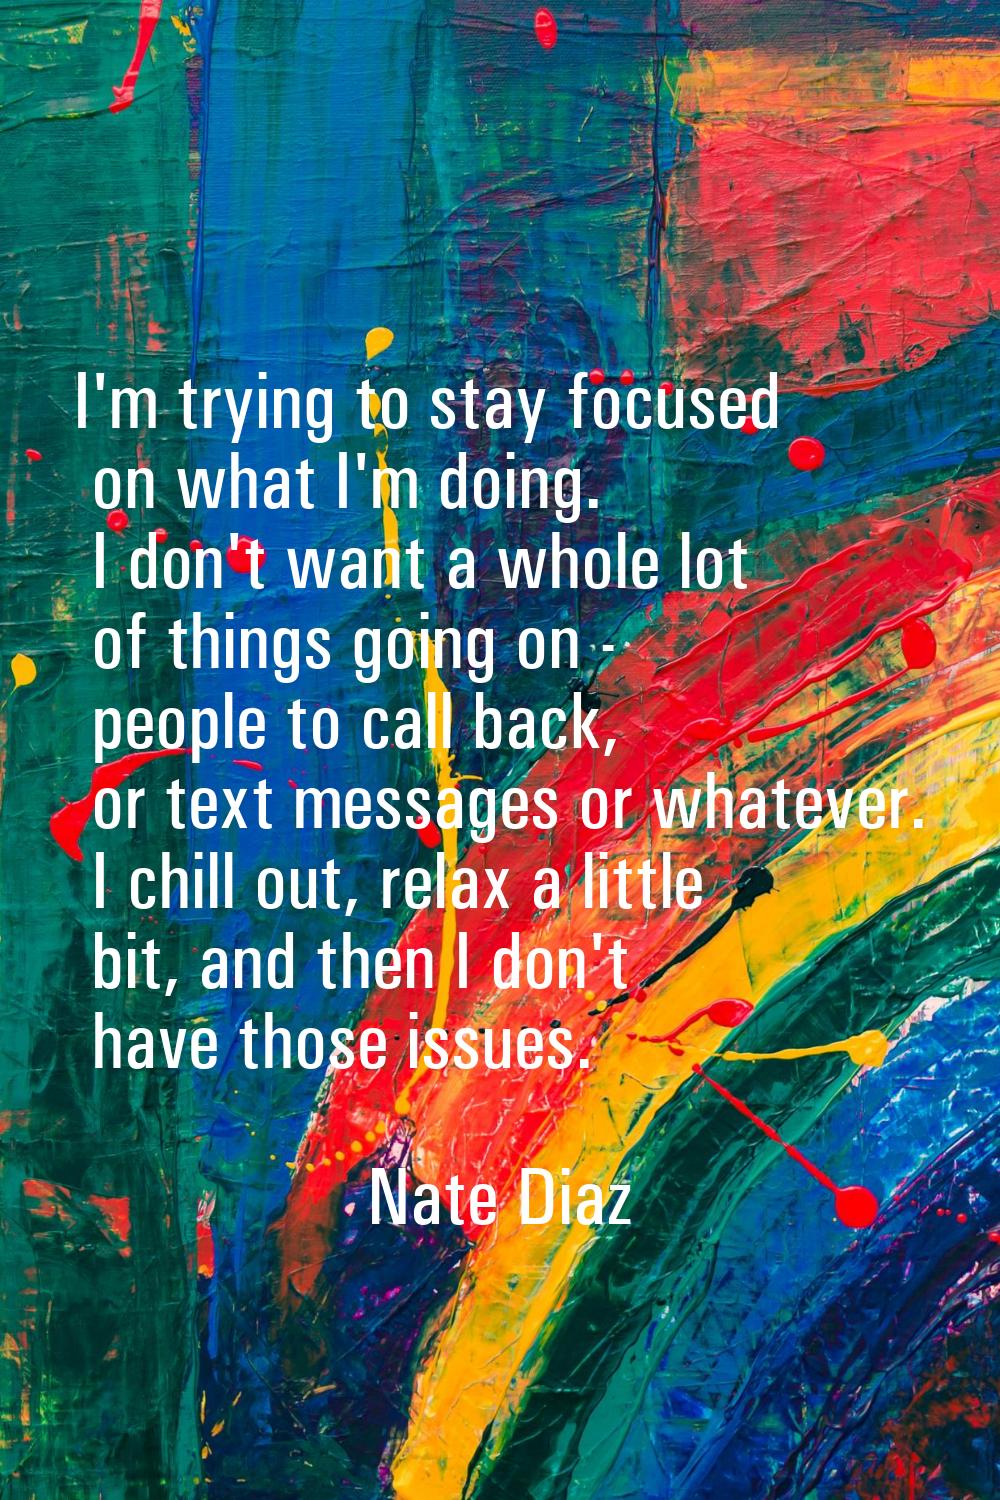 I'm trying to stay focused on what I'm doing. I don't want a whole lot of things going on - people 